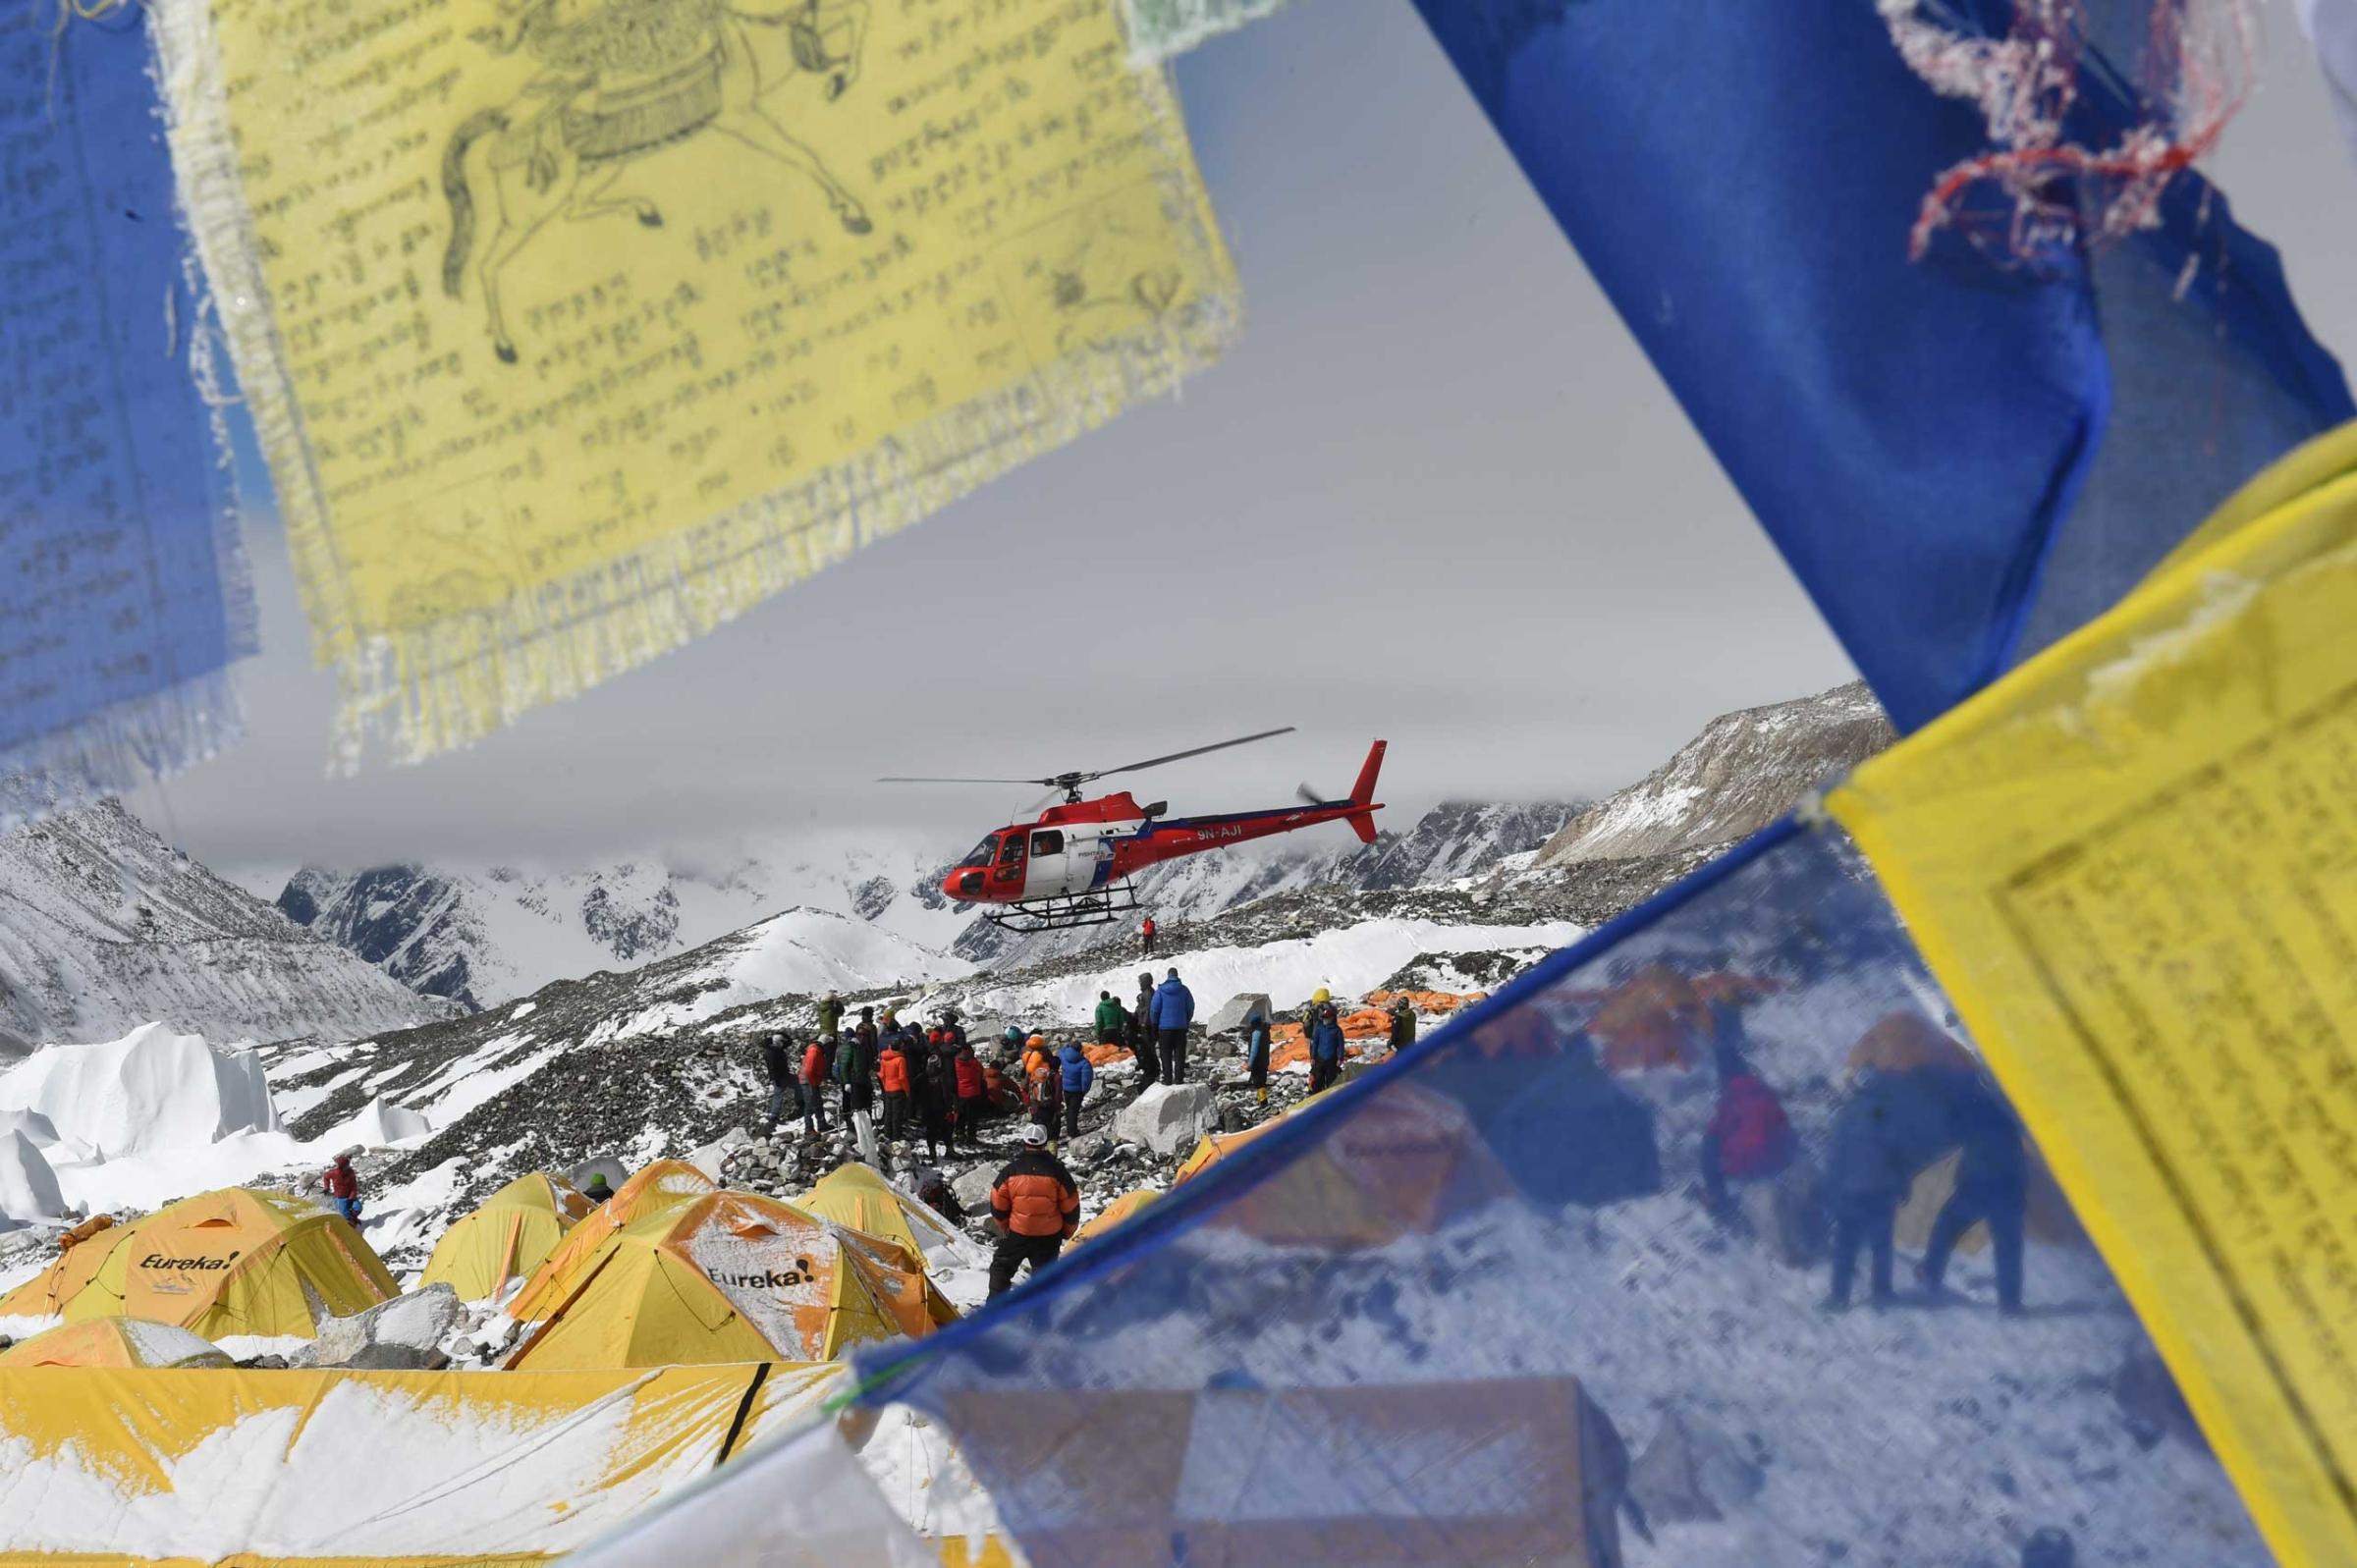 Prayer flags frame a rescue helicopter as it ferries the injured from Everest Base Camp on April 26, 2015, one day after an avalanche triggered by an earthquake outside Kathmandu, Nepal.